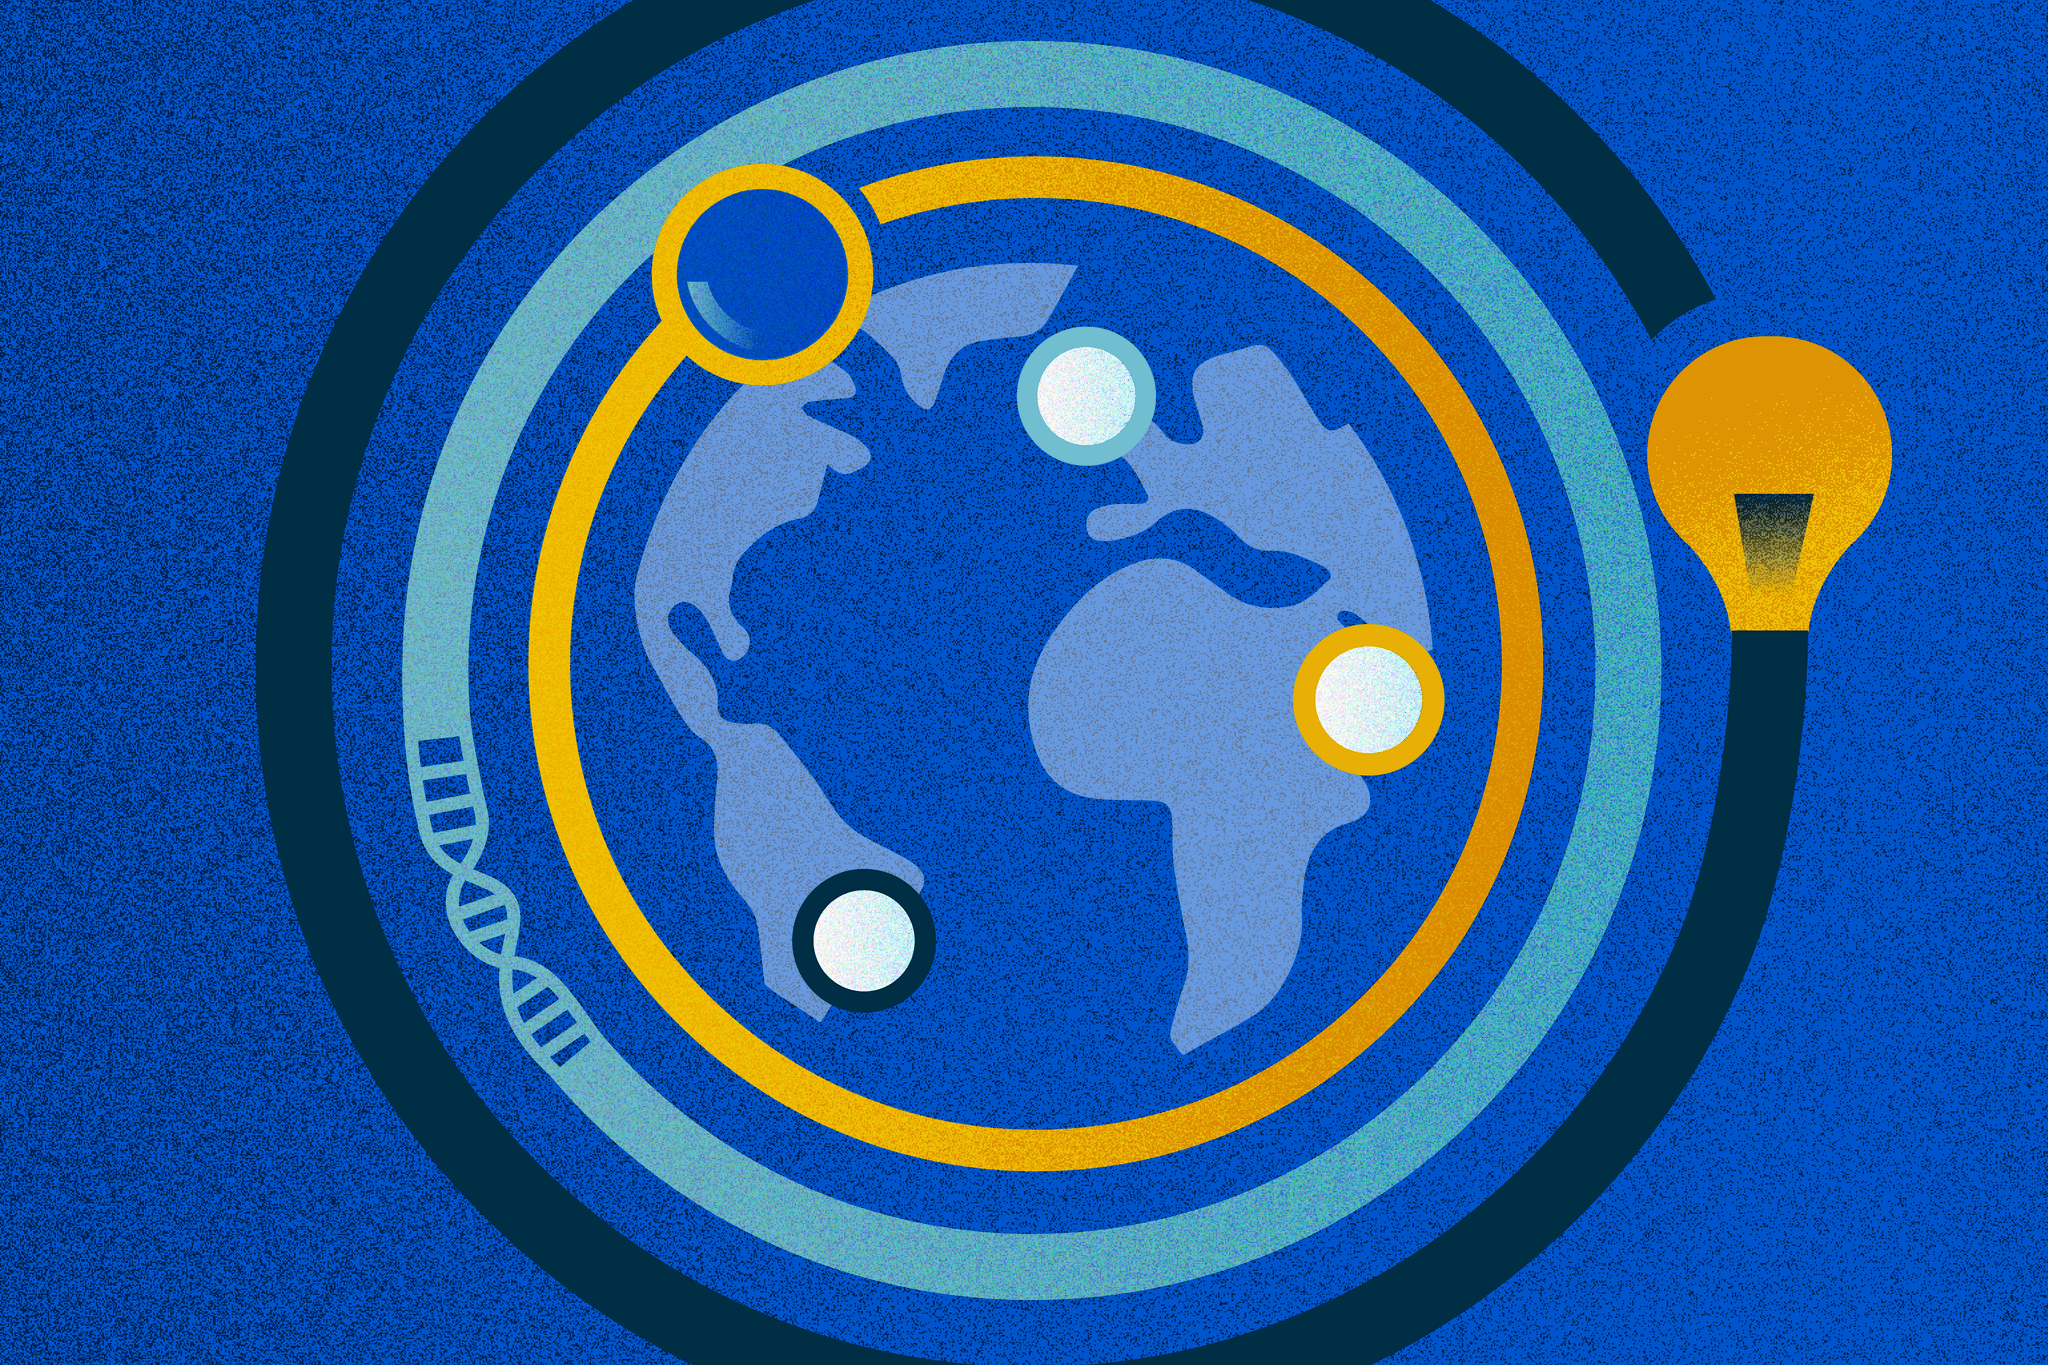 A stylisted planet earth on a deep blue background. The planet is surrounded by rings which have a lightbulb and a dna string within them.